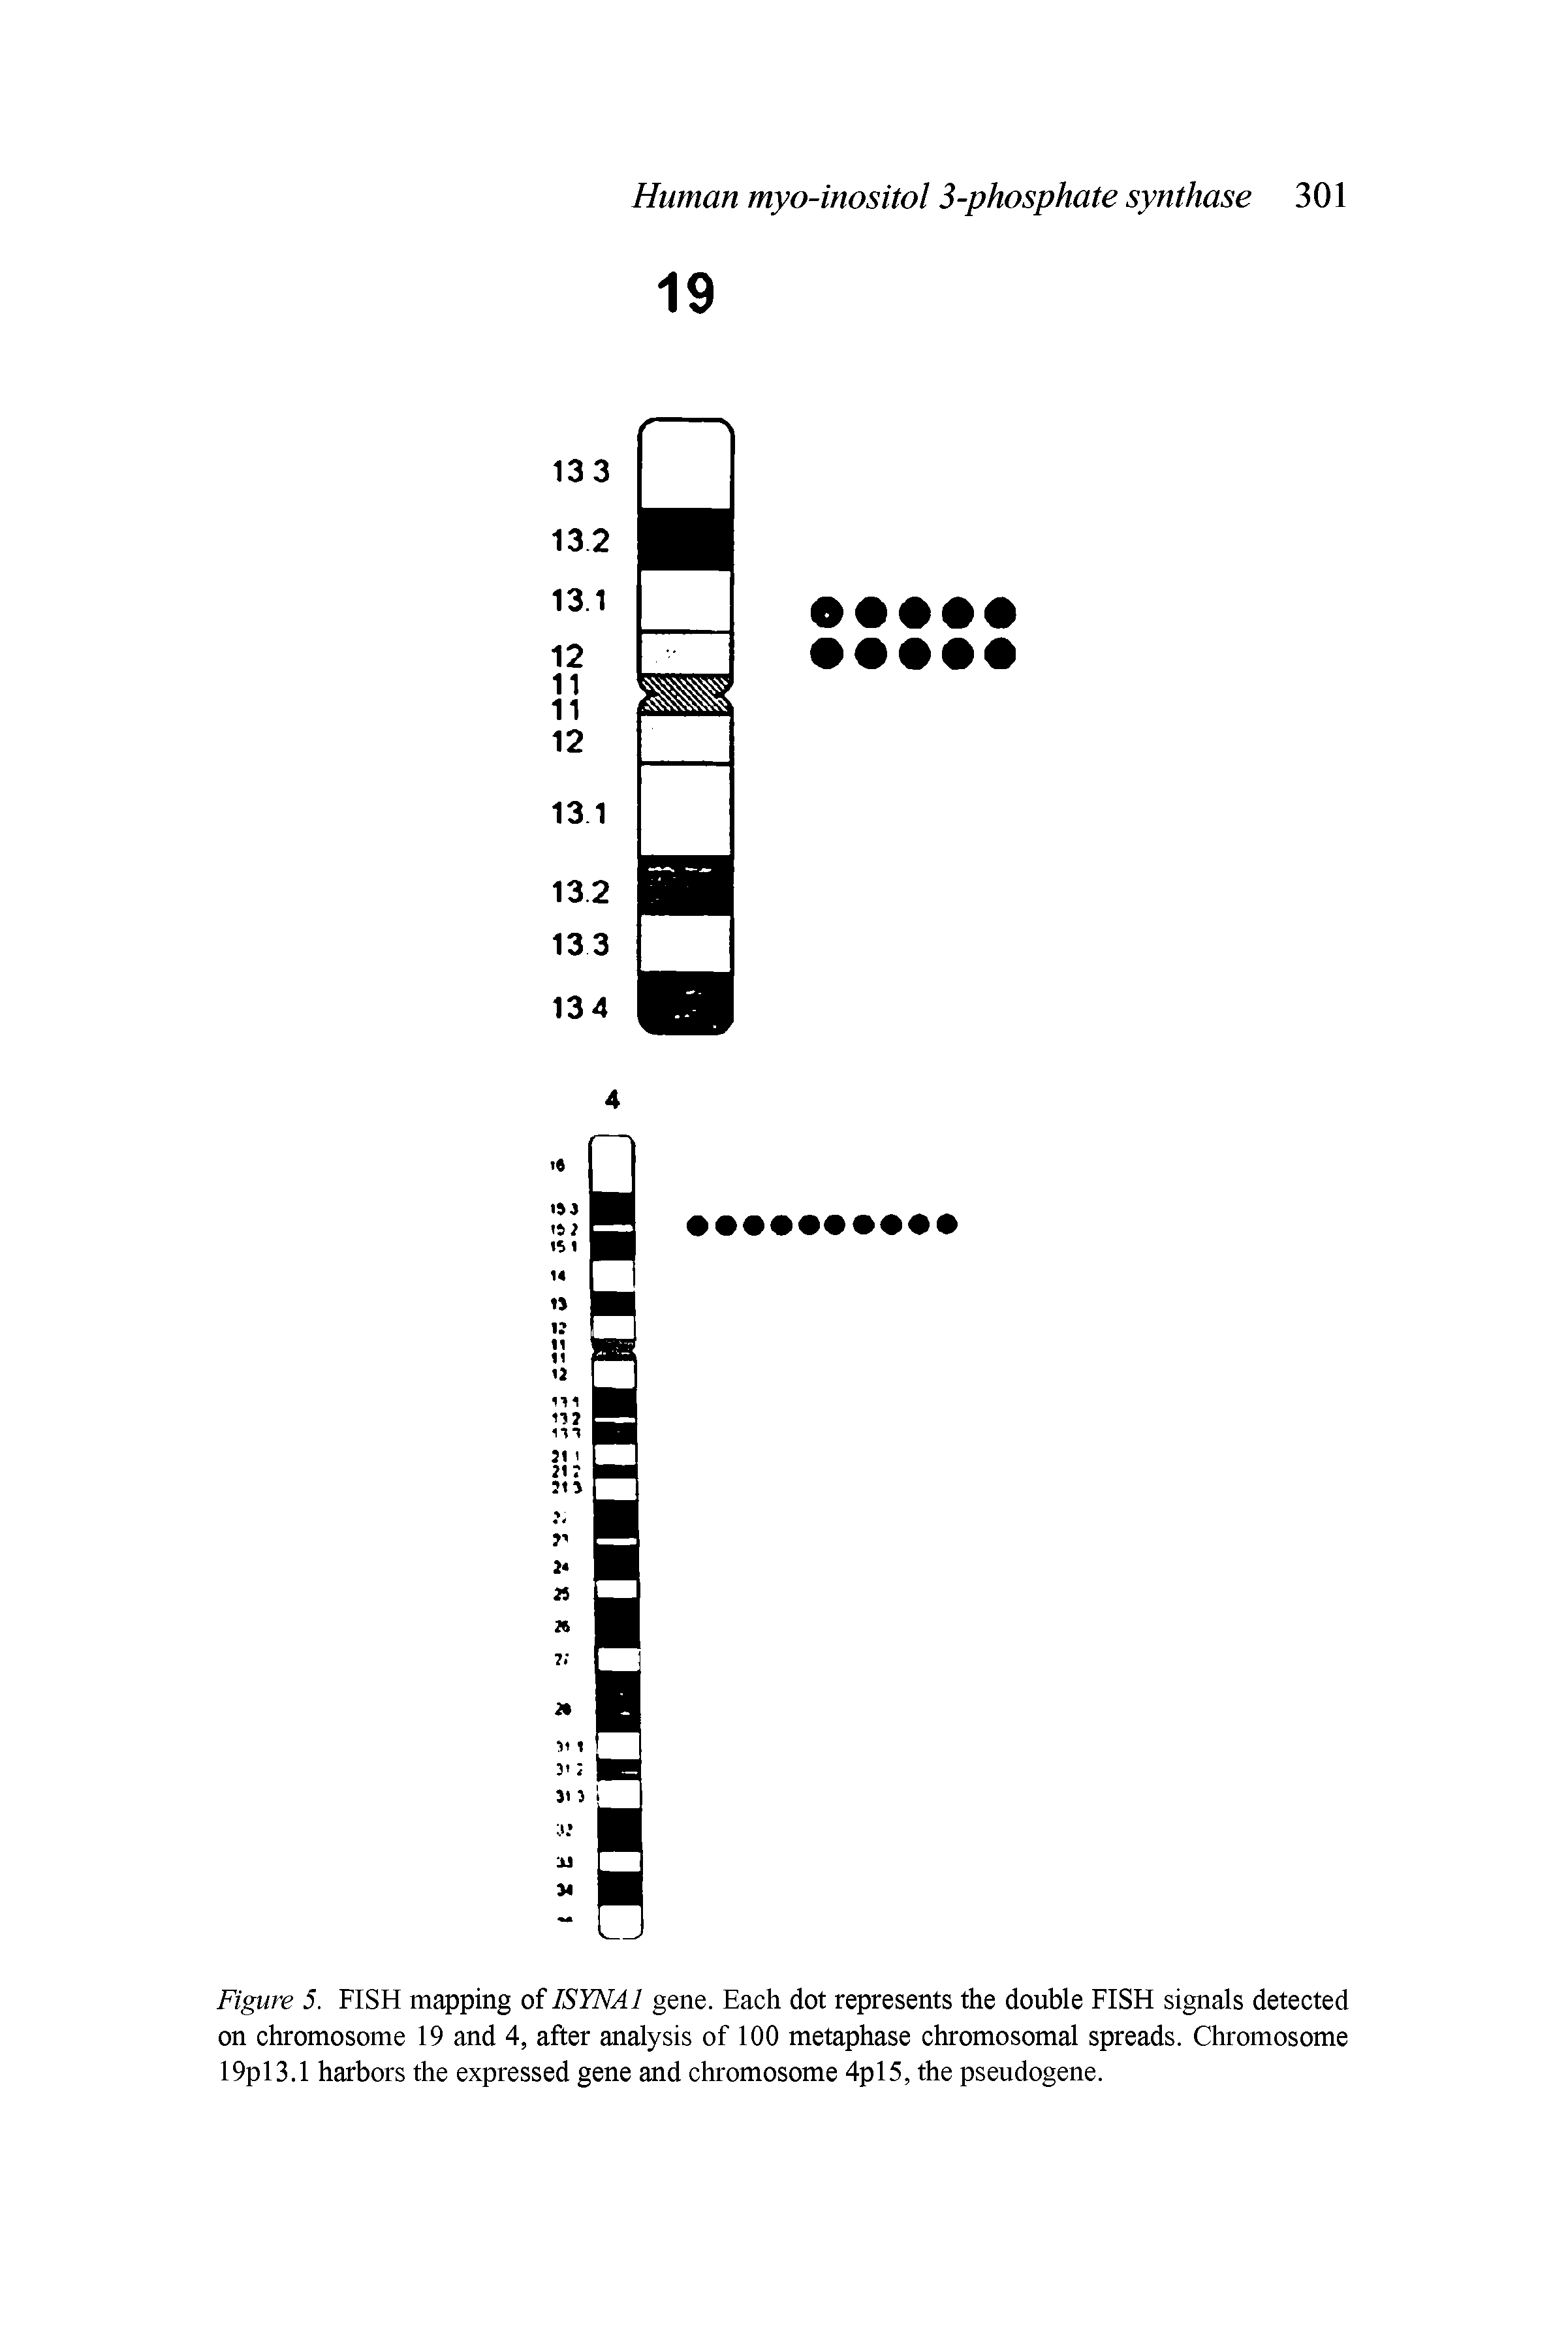 Figure 5. FISH mapping of ISYNA1 gene. Each dot represents the double FISH signals detected on chromosome 19 and 4, after analysis of 100 metaphase chromosomal spreads. Chromosome 19p 13.1 harbors the expressed gene and chromosome 4pl5, the pseudogene.